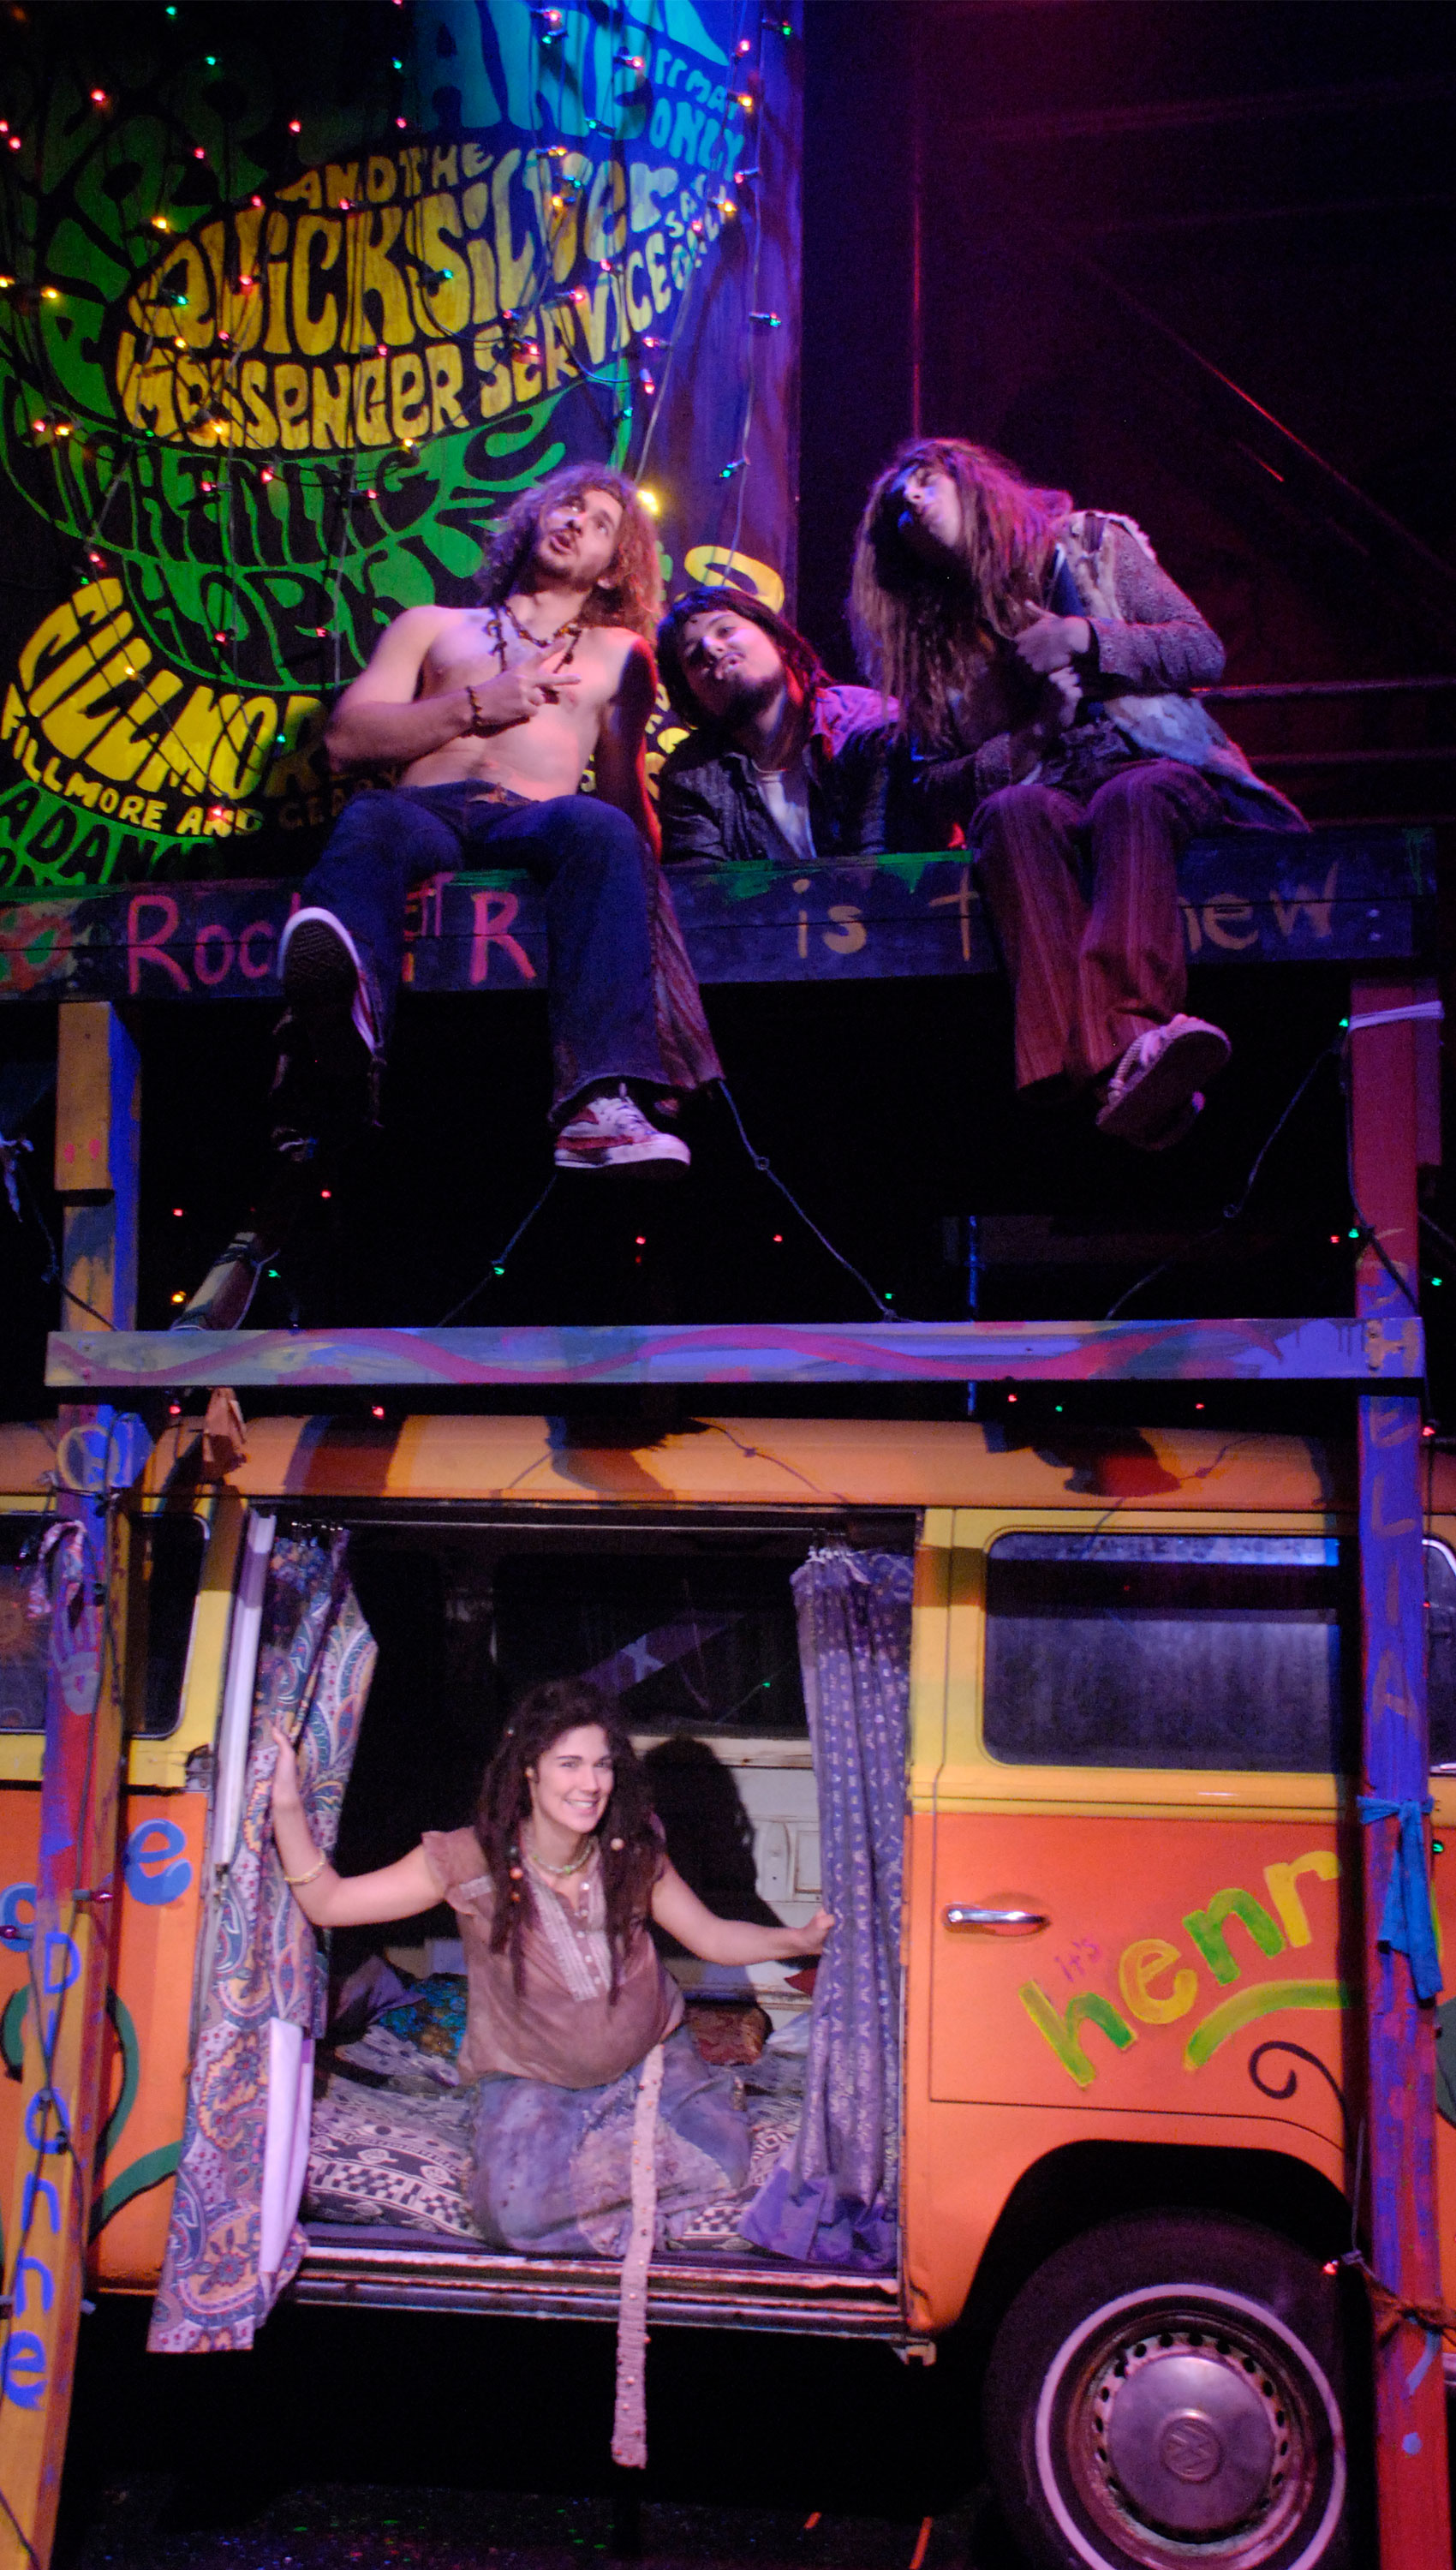 Three characters sit on a platform that is covered in graffiti and are shaping their lips in an “O” shape. They are above a 1960s-style van in which the side is opened and curtains are being pushed aside by a pregnant woman smiling at the camera.